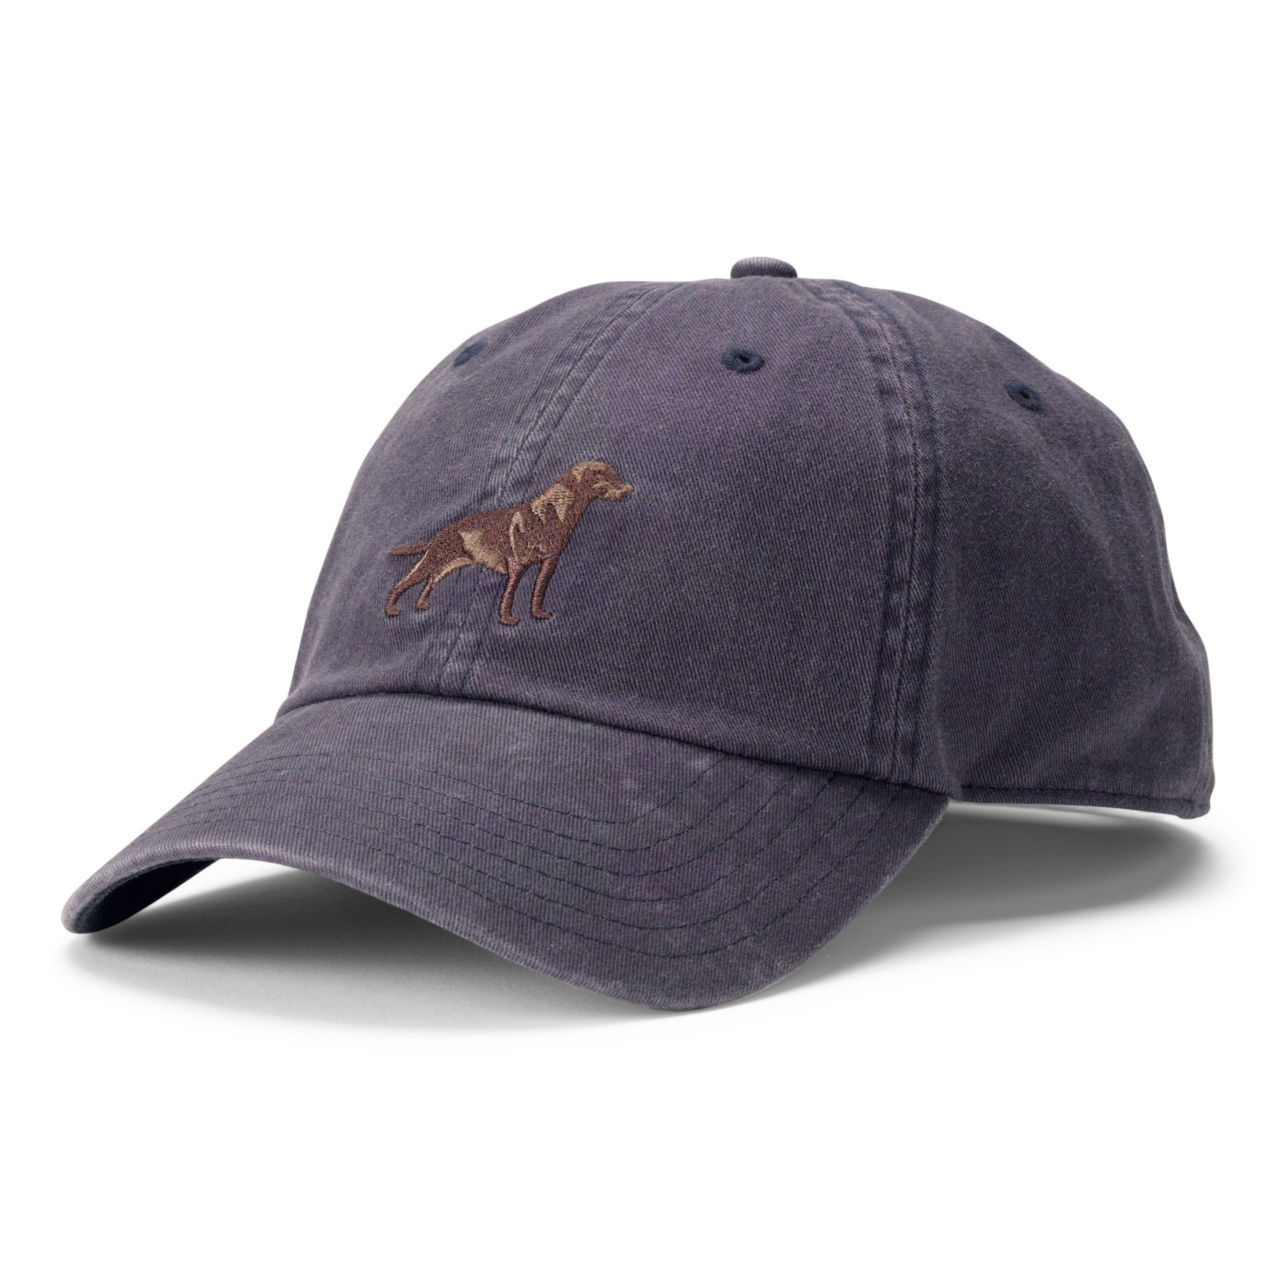 Embroidered Labrador Ball Cap - DEEP NAVY image number 0